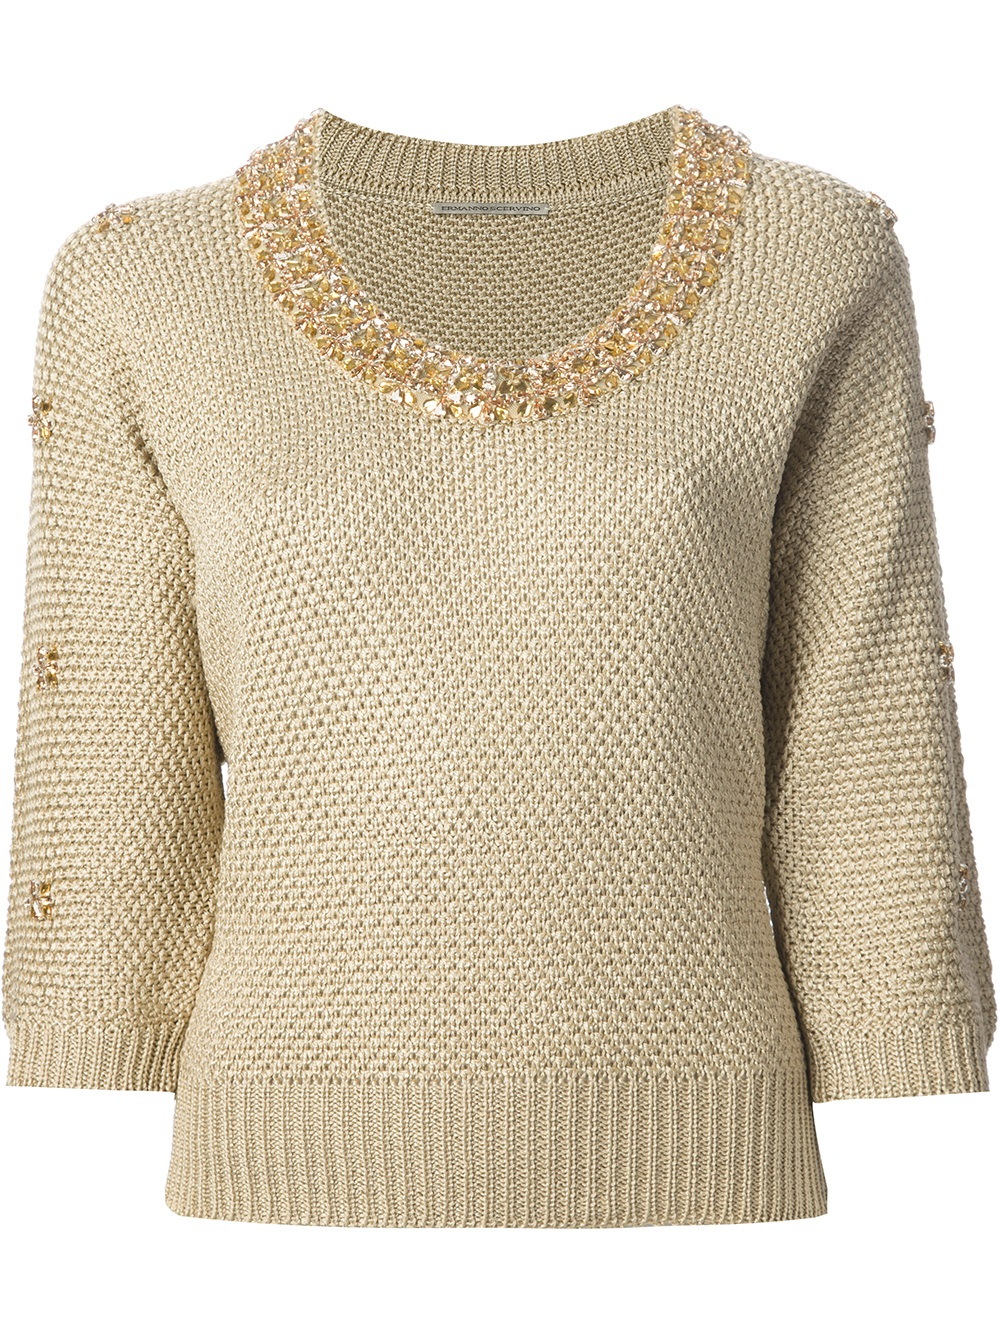 Ermanno Scervino Embellished Knit Sweater in Metallic - Lyst